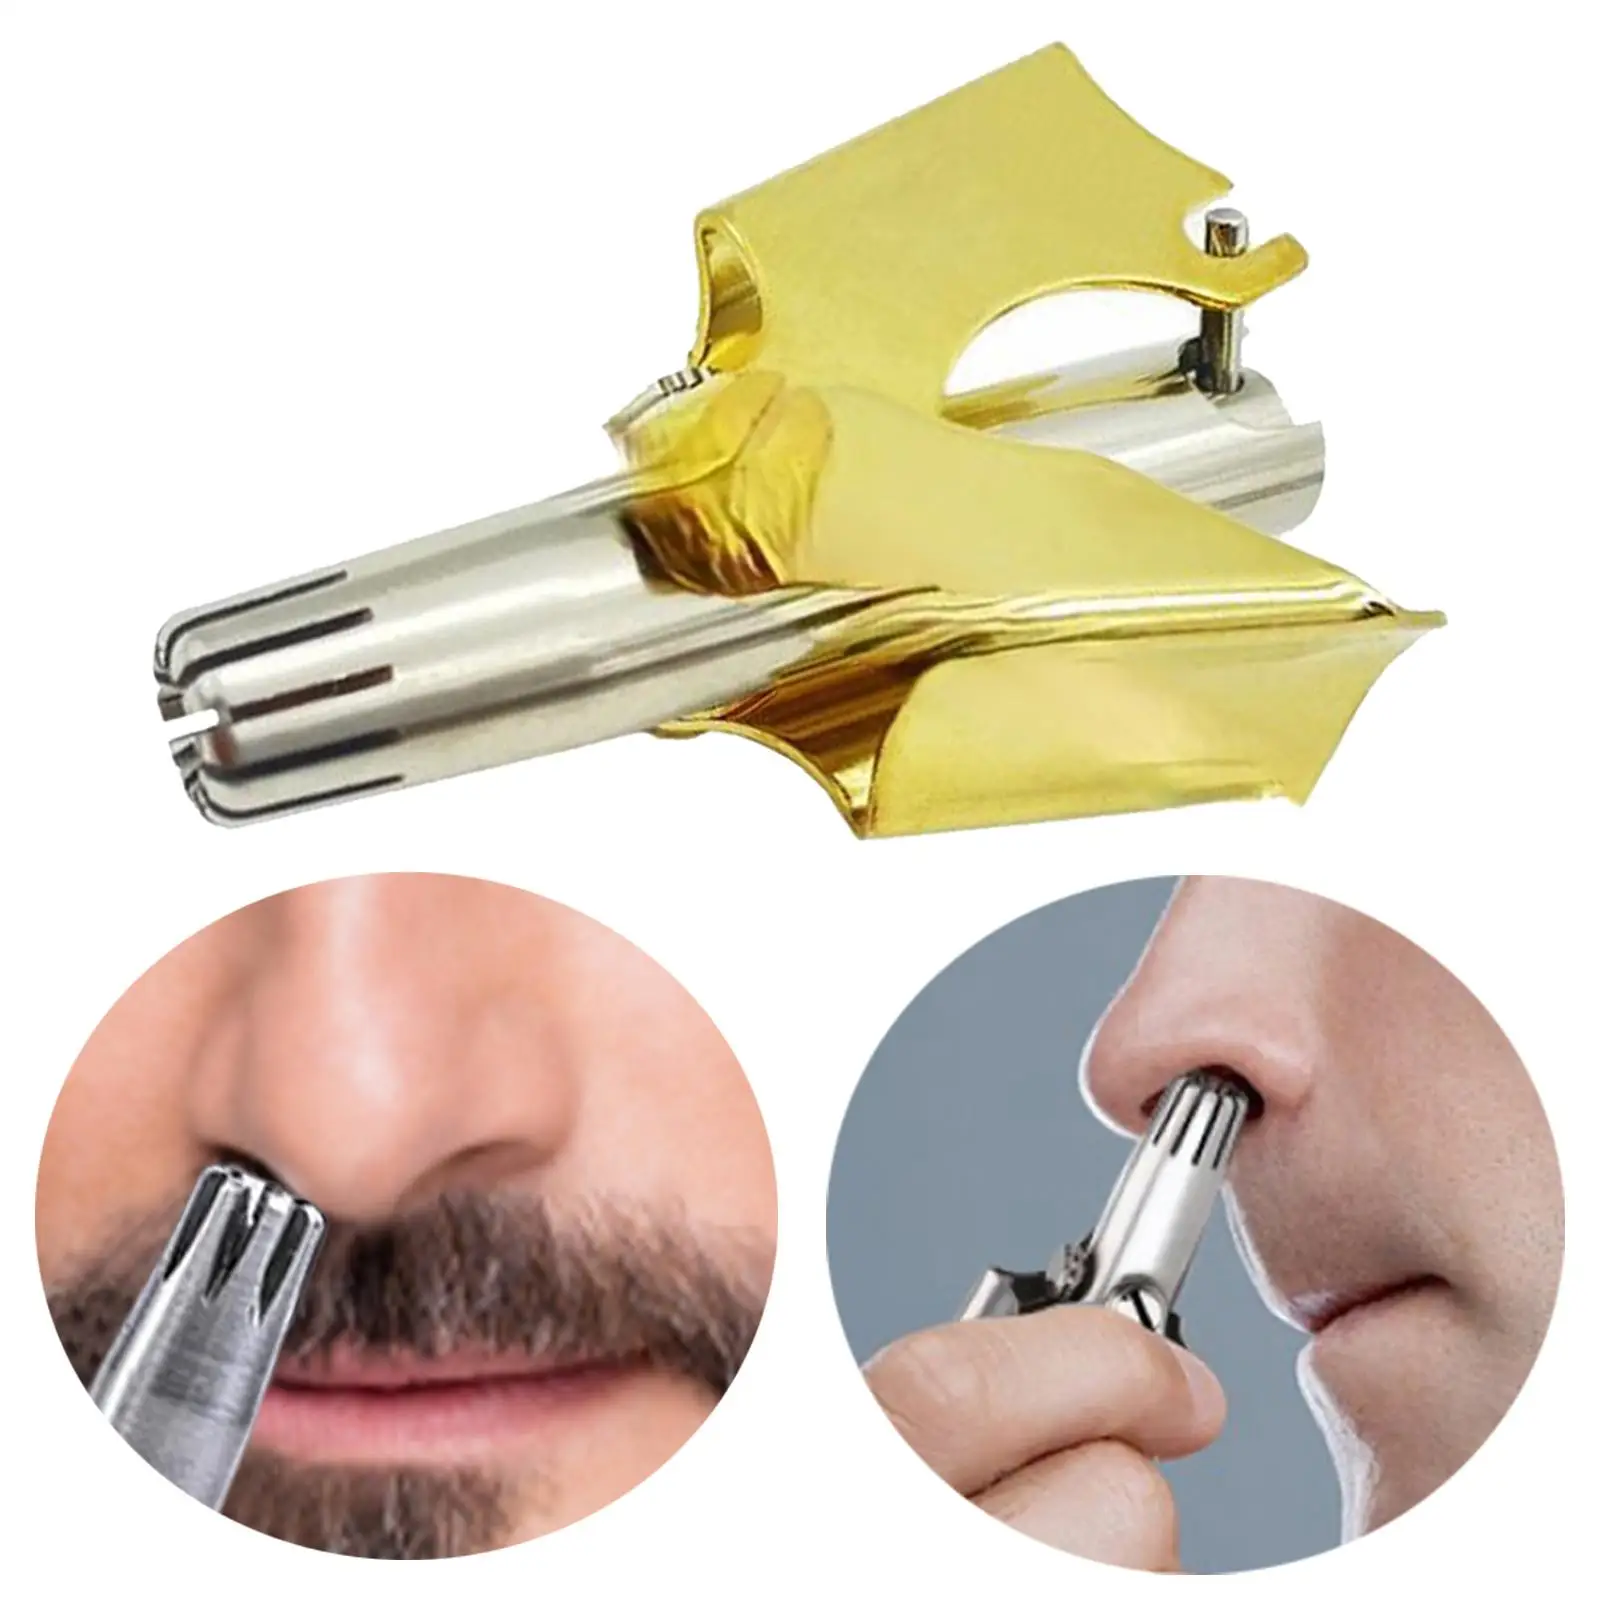 Portable Nose Ear Hair Trimmer Whole Body Washable Stainless Steel Mini Nose Razor Shaver Low Noise Gift for Men Ear Hair Cutter